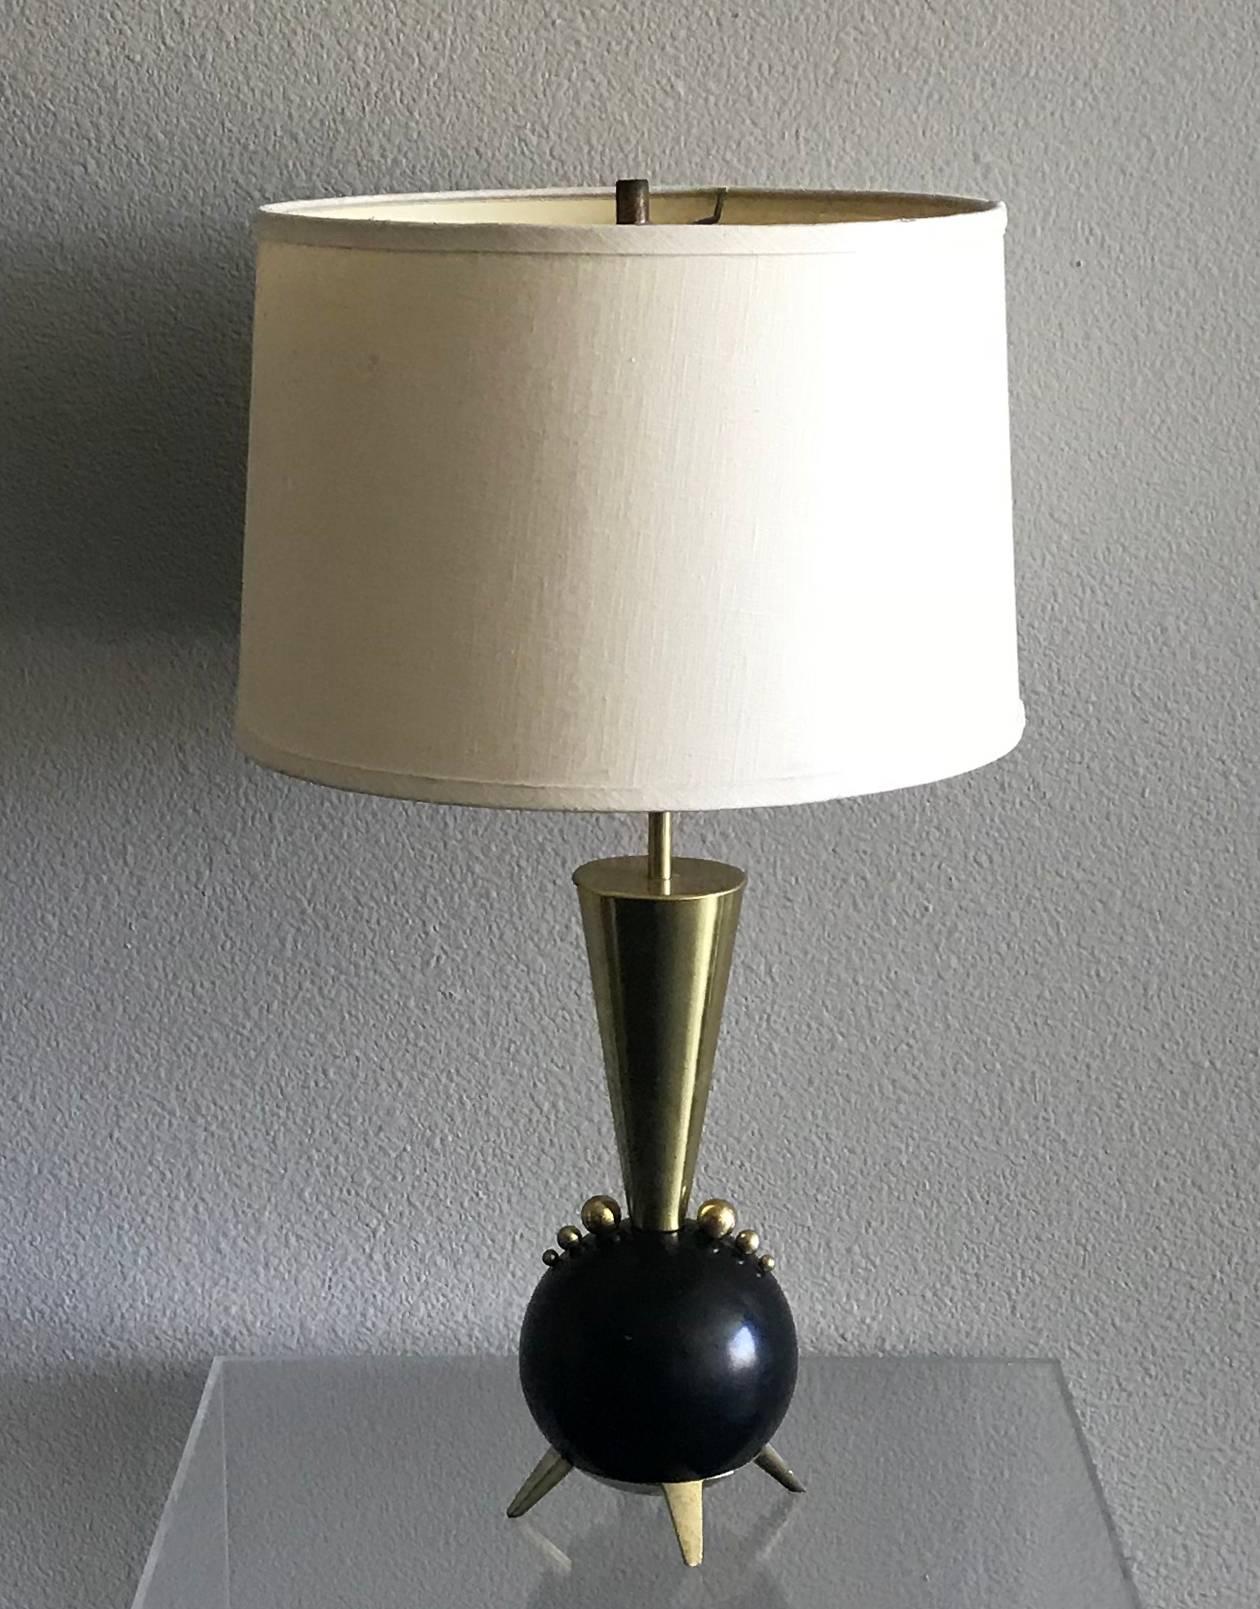 An absolutely stunning pair of Rembrandt orb table lamps. The lamps feature black orbs with brass ball decorations, brass body and neck. These lamps epitomize mid century modern style, but effortlessly can be paired with contemporary, boho chic and